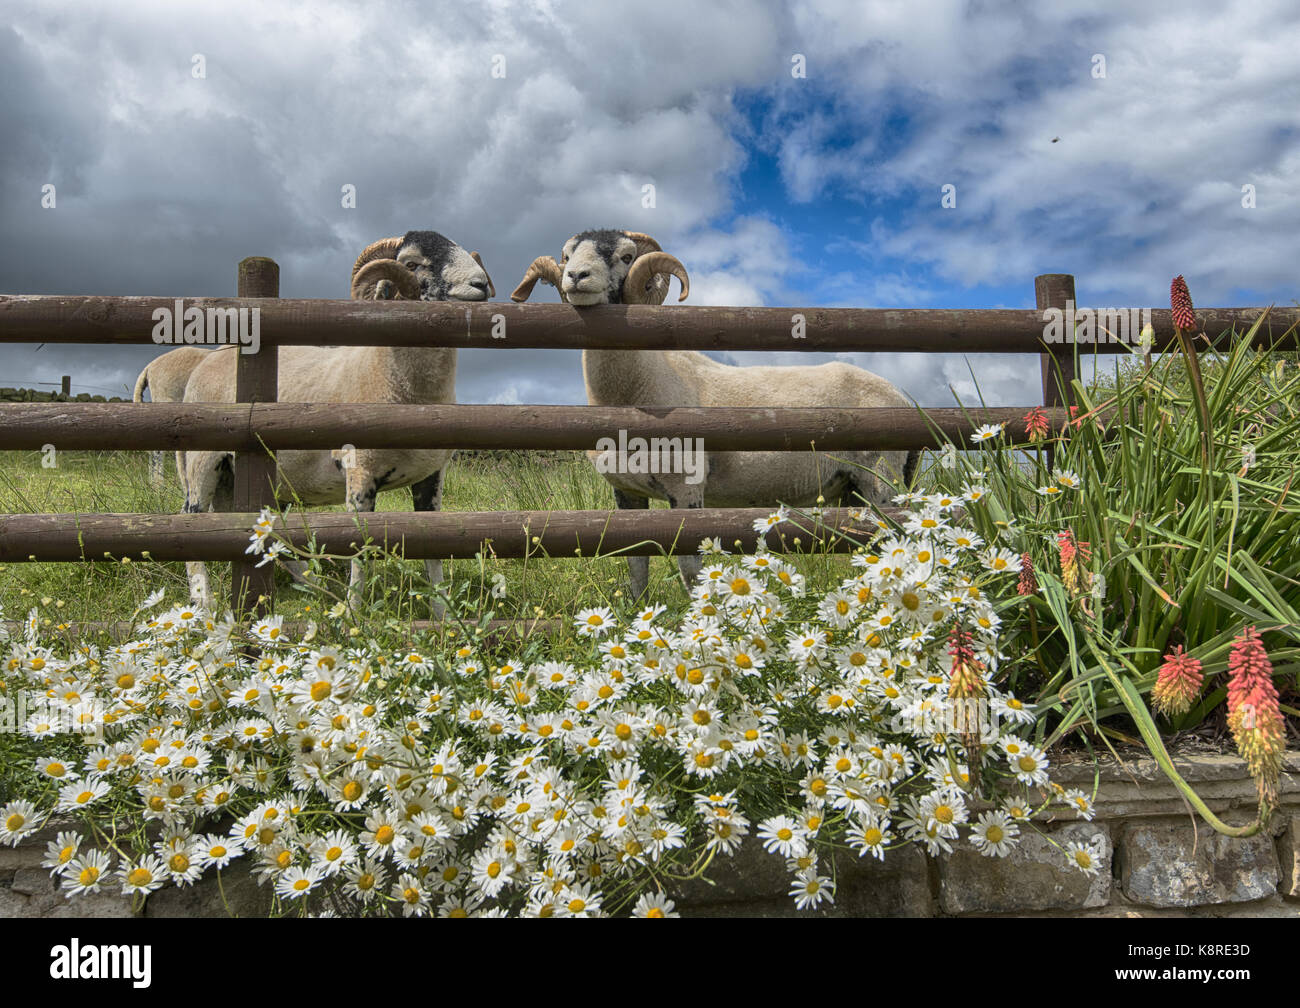 Swaledale rams with fence and flowers, Longnor,Staffordshire. Stock Photo